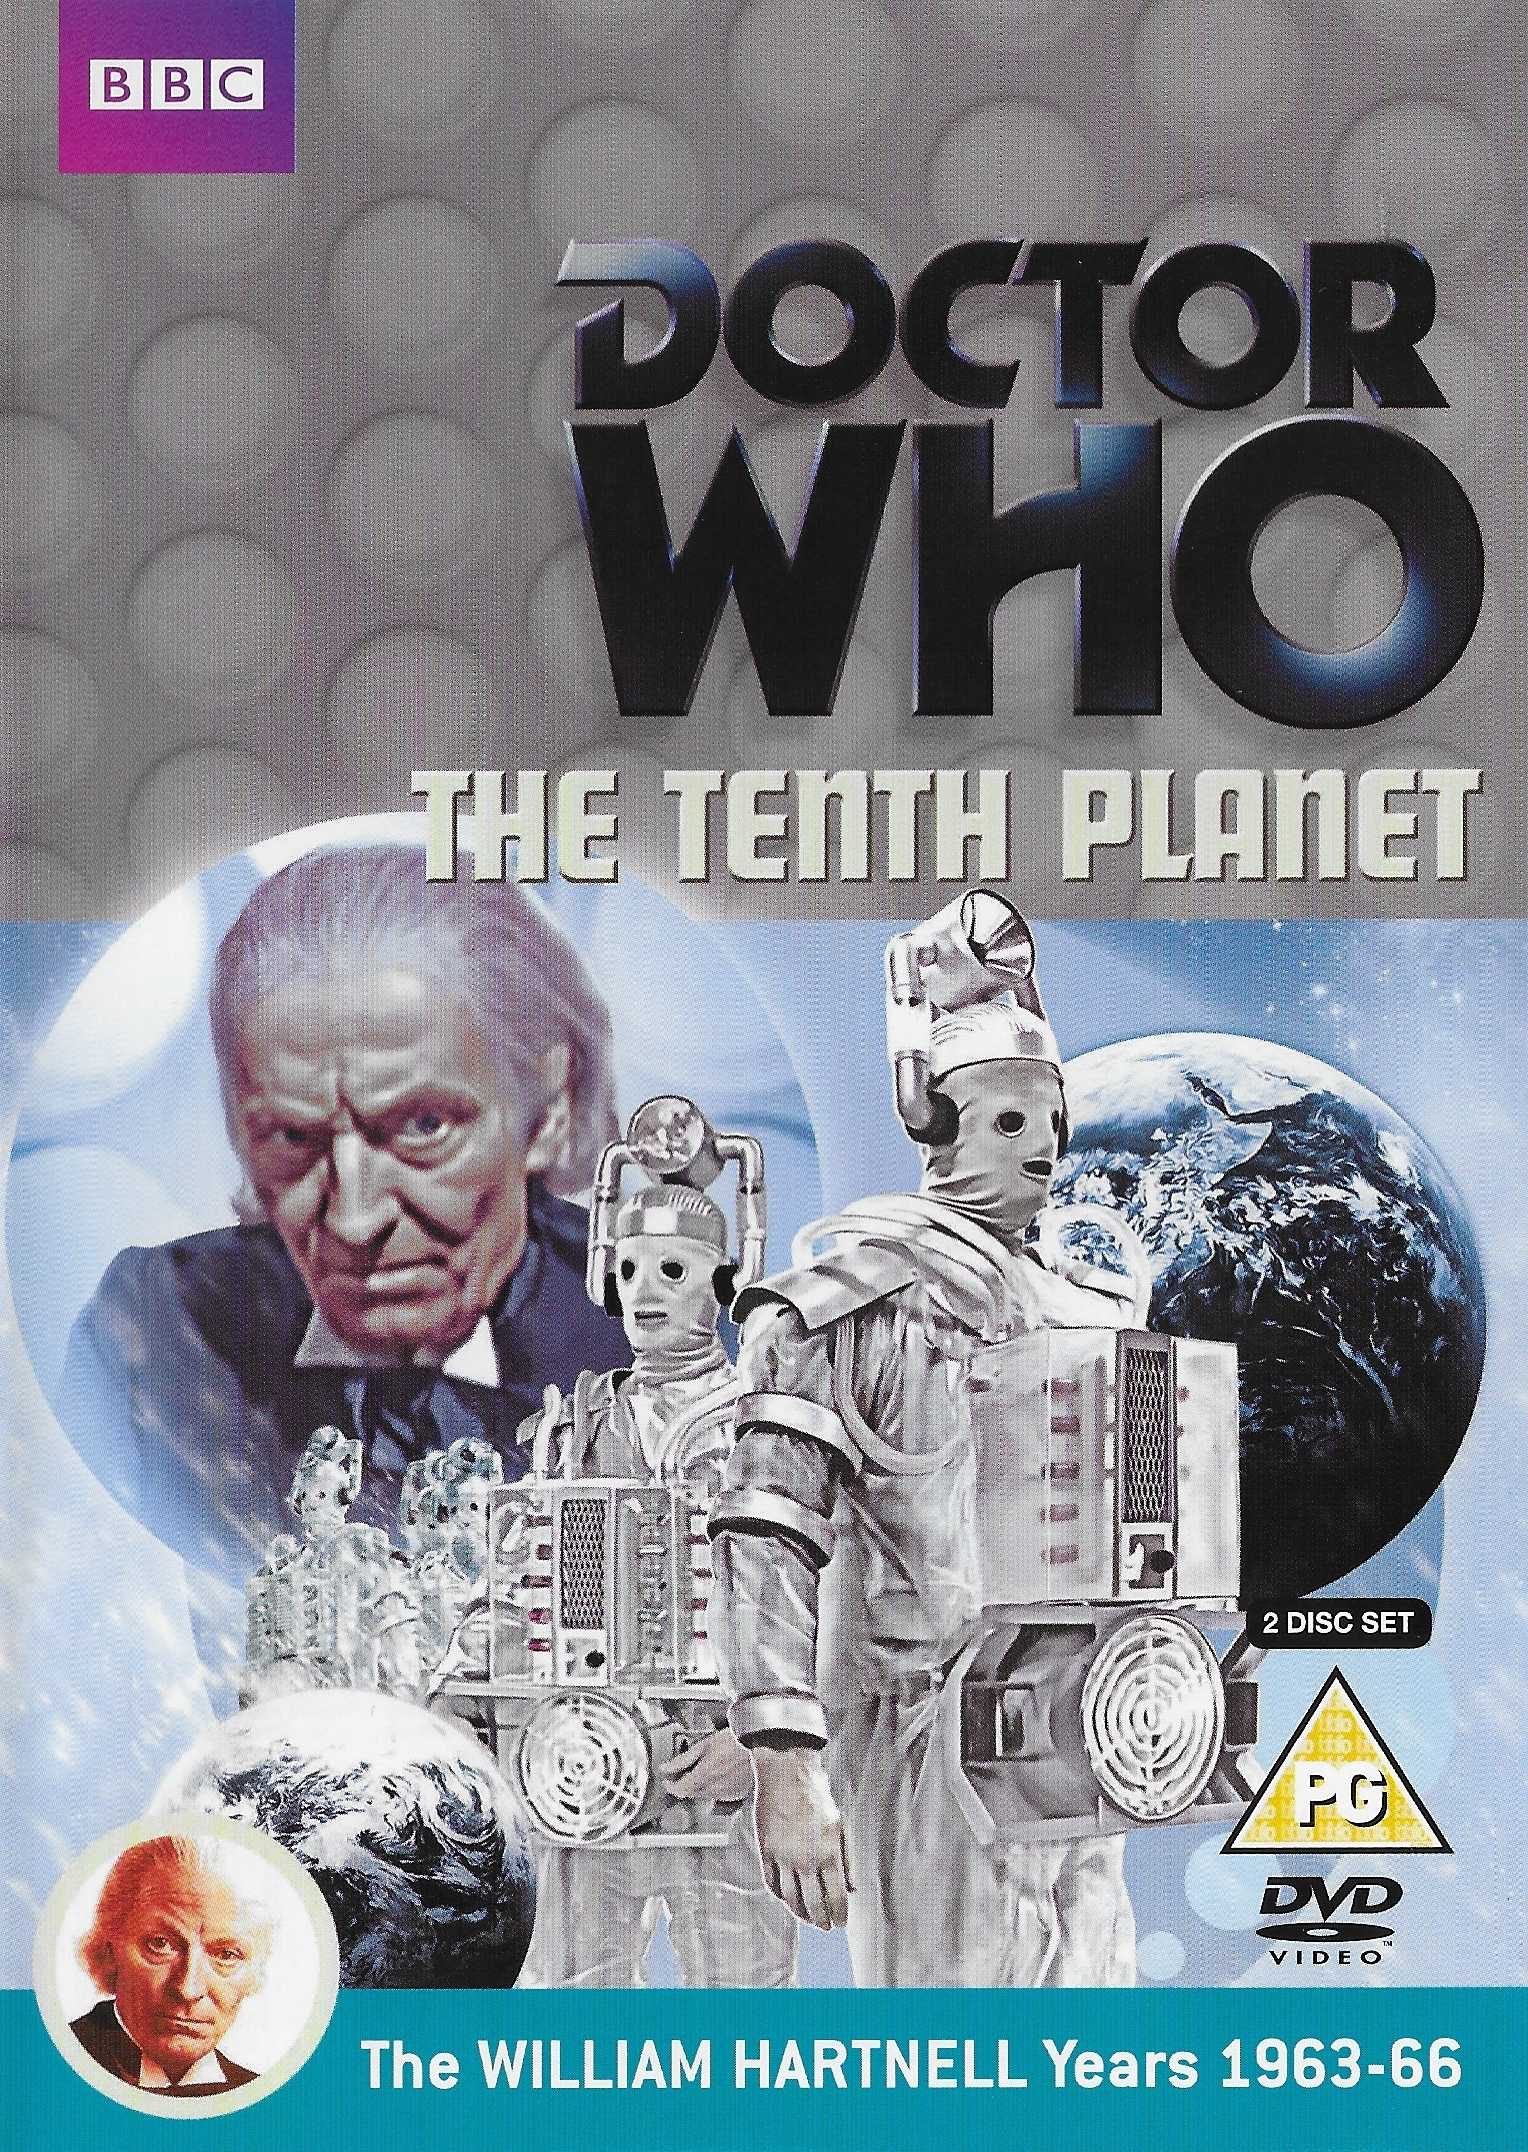 Picture of BBCDVD 3382 Doctor Who - The tenth planet by artist Kit Pedler / Gerry Davis from the BBC records and Tapes library